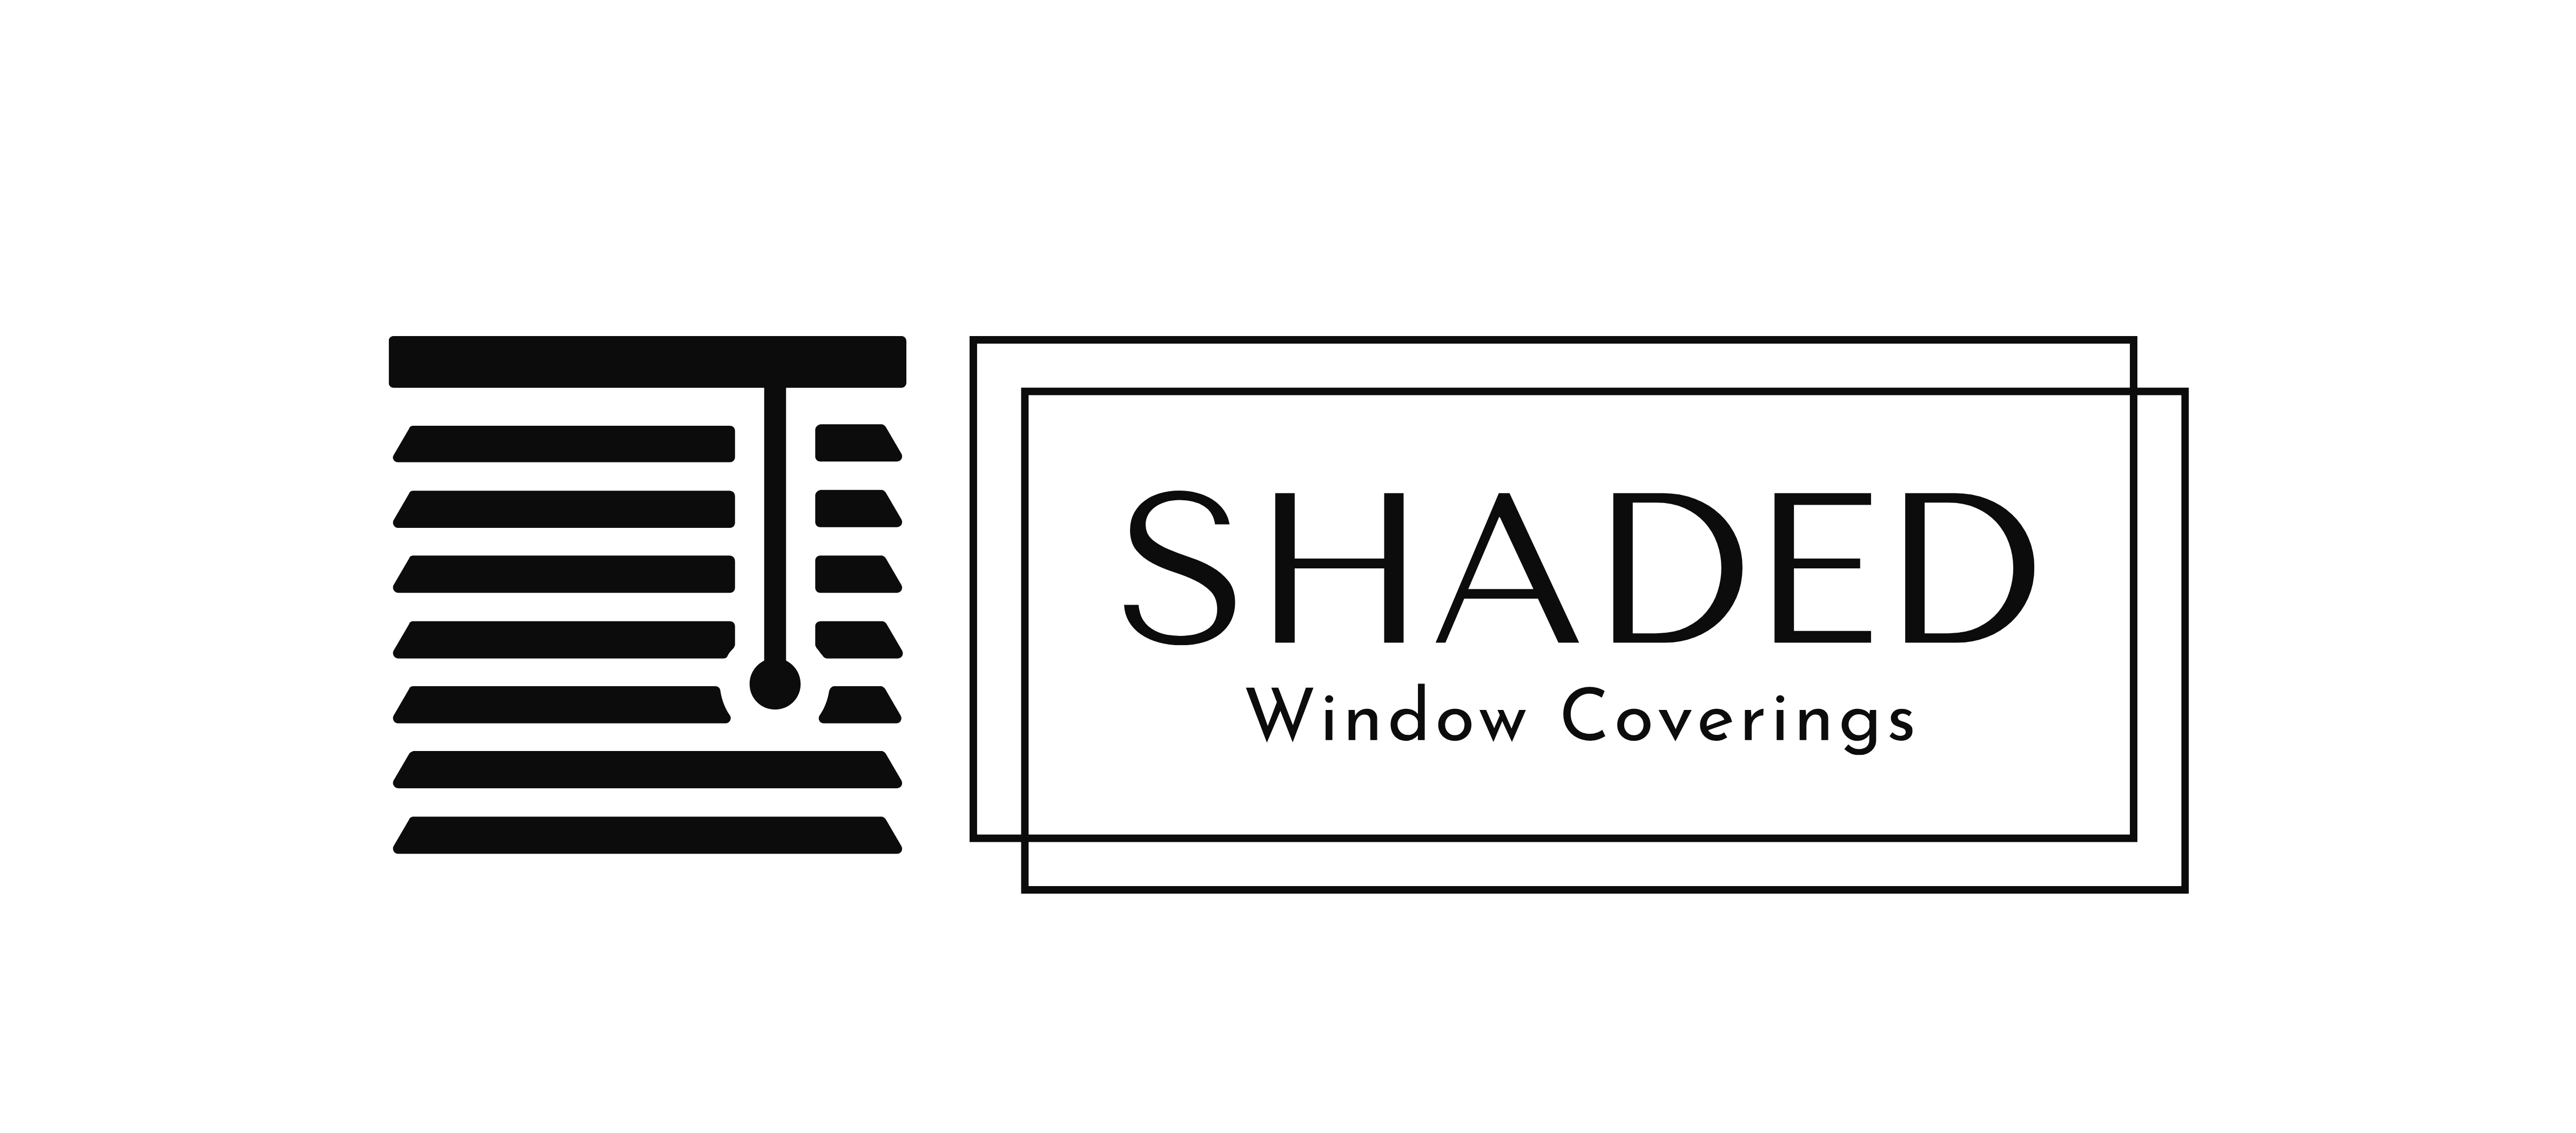 Shaded Window Coverings